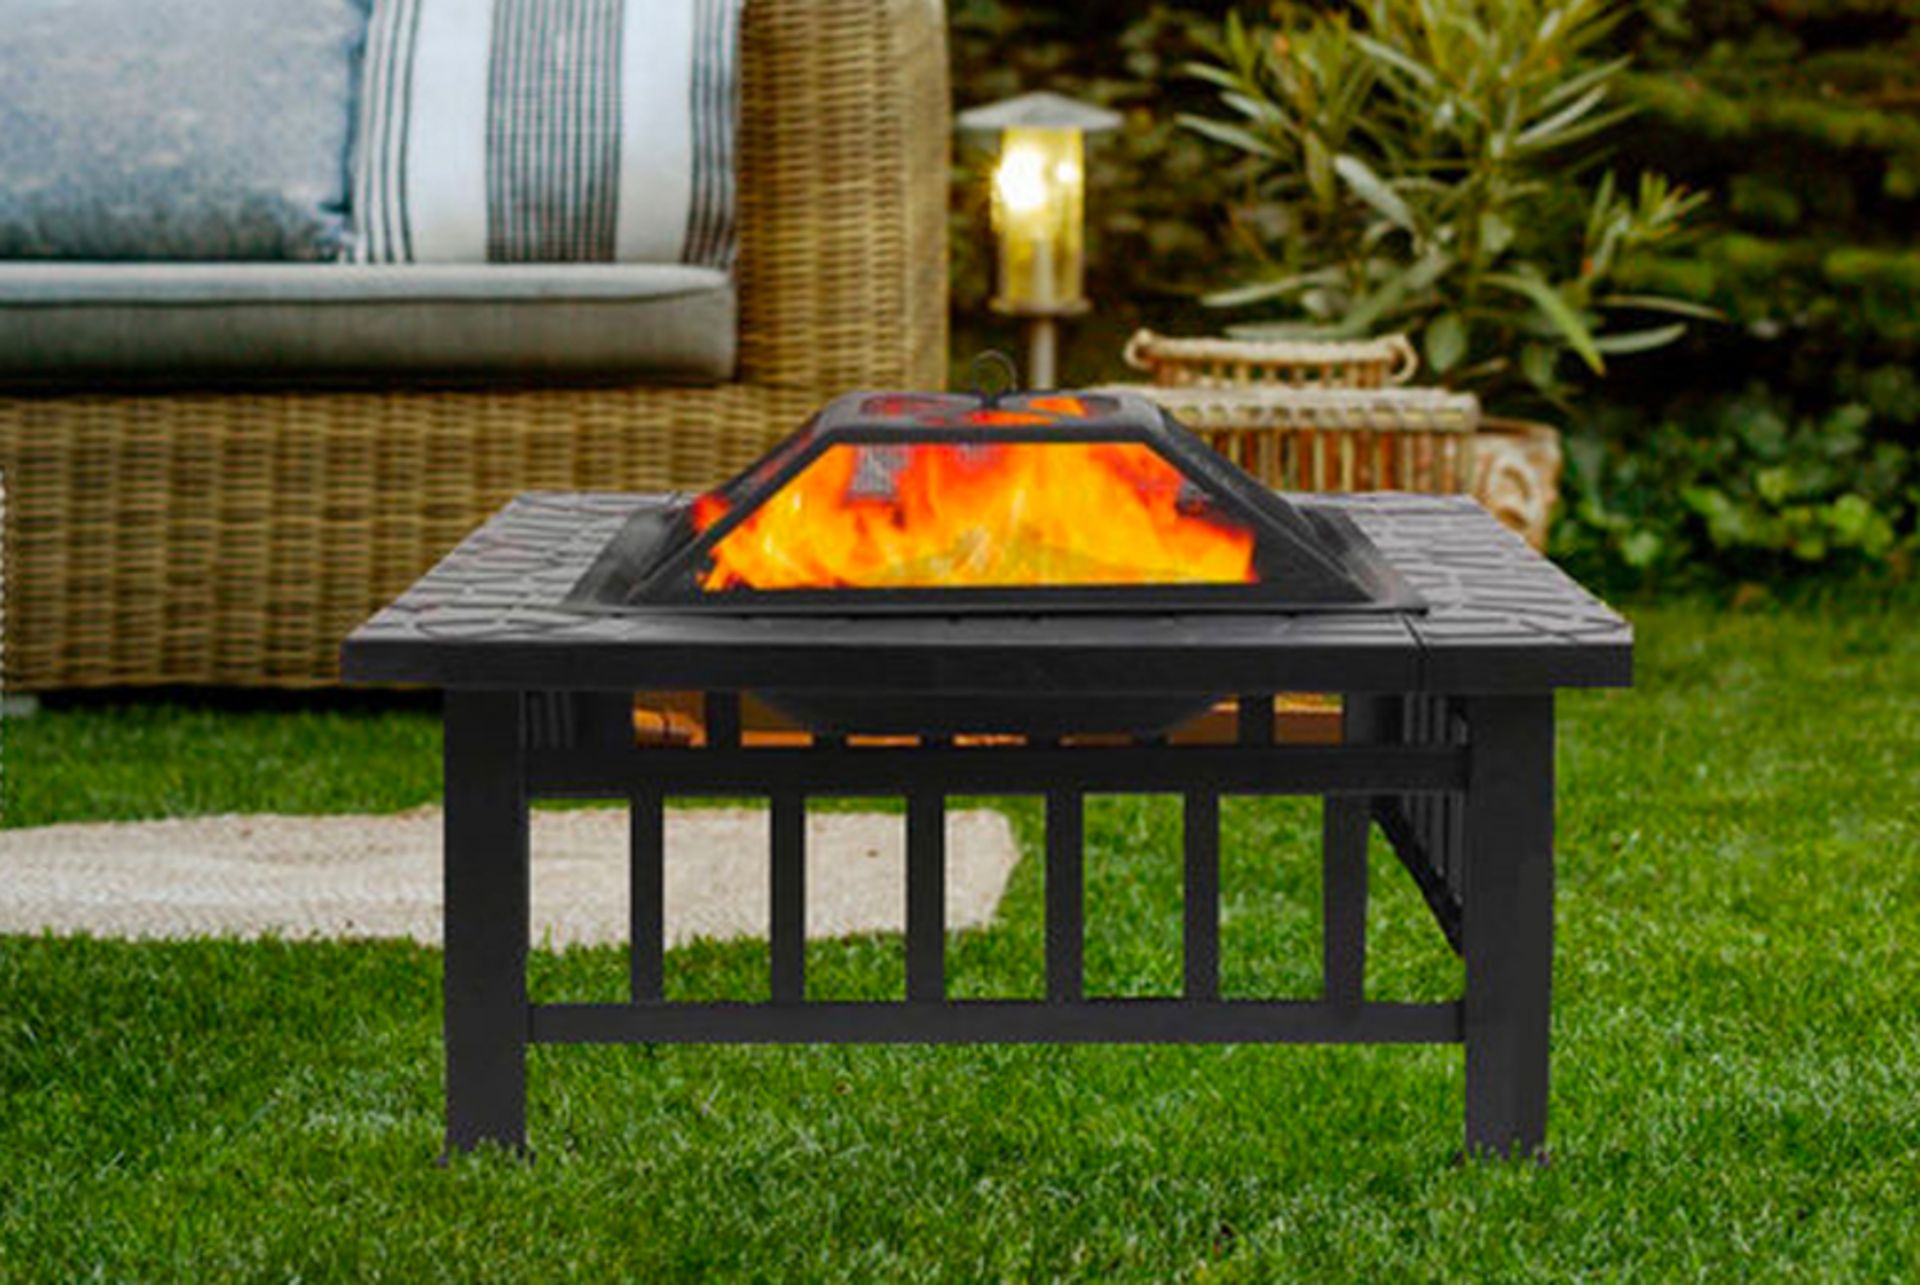 FREE DELIVERY - 3-IN-1 LARGE SQUARE FIRE PIT